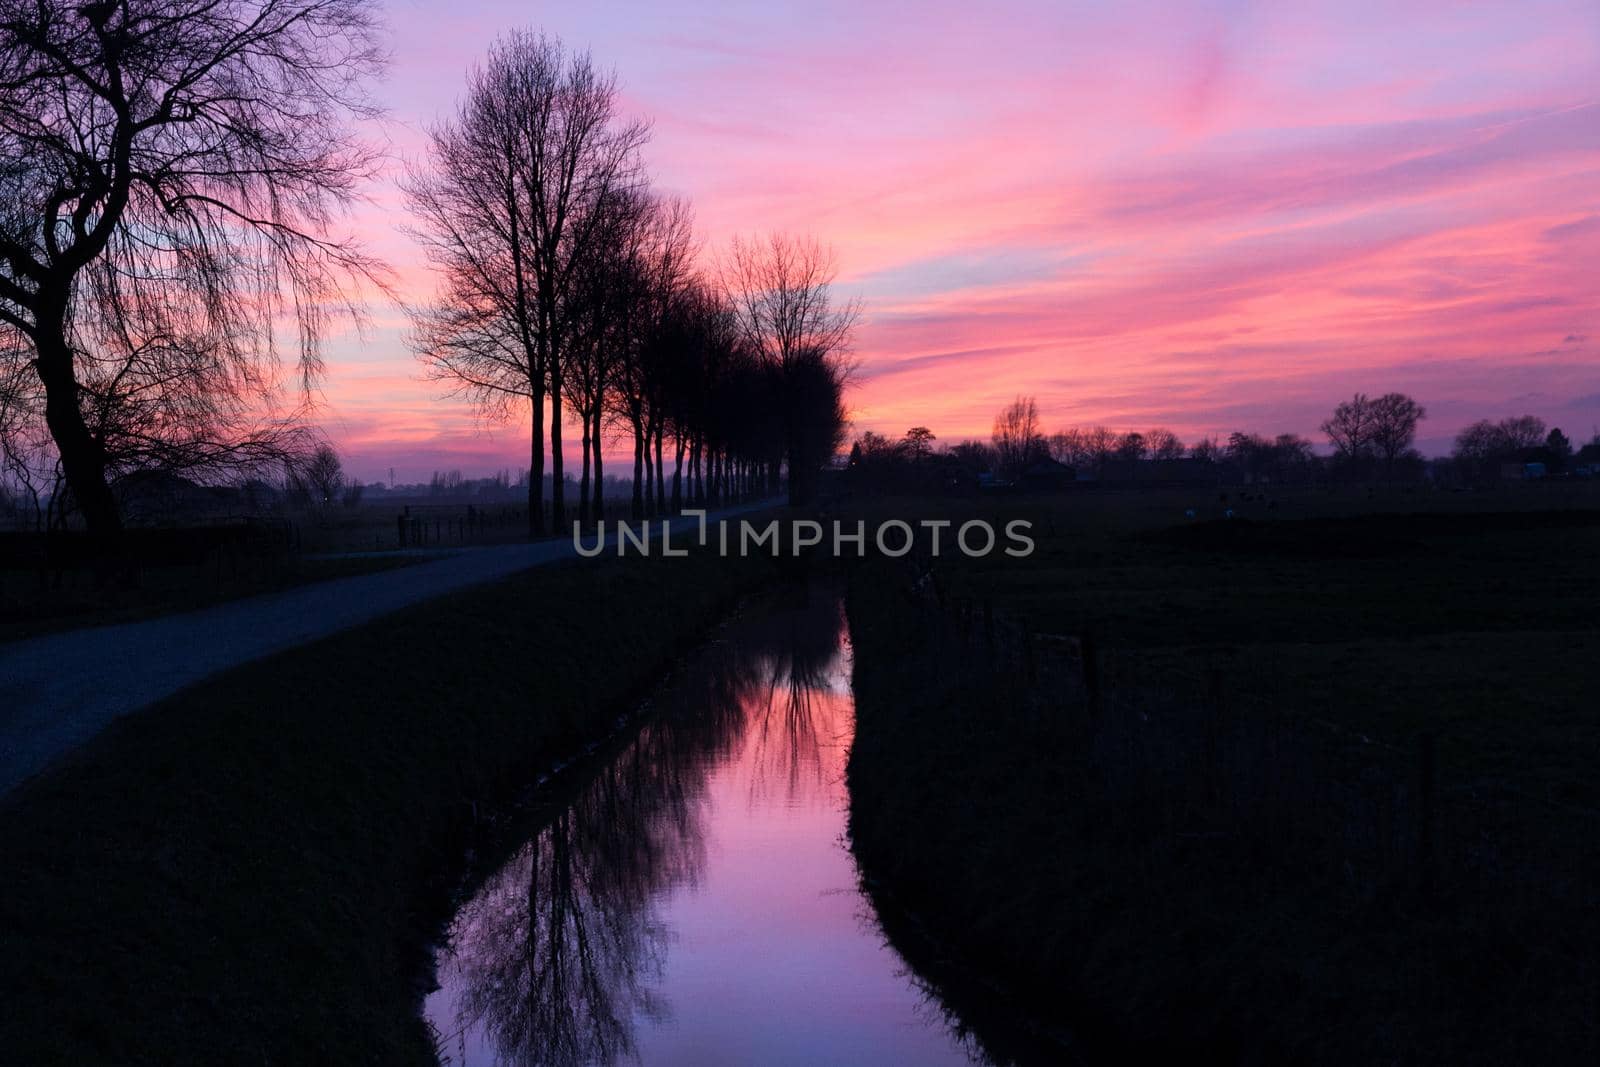 Reflection of a pink sunset in a ditch in an rural area in The Netherlands